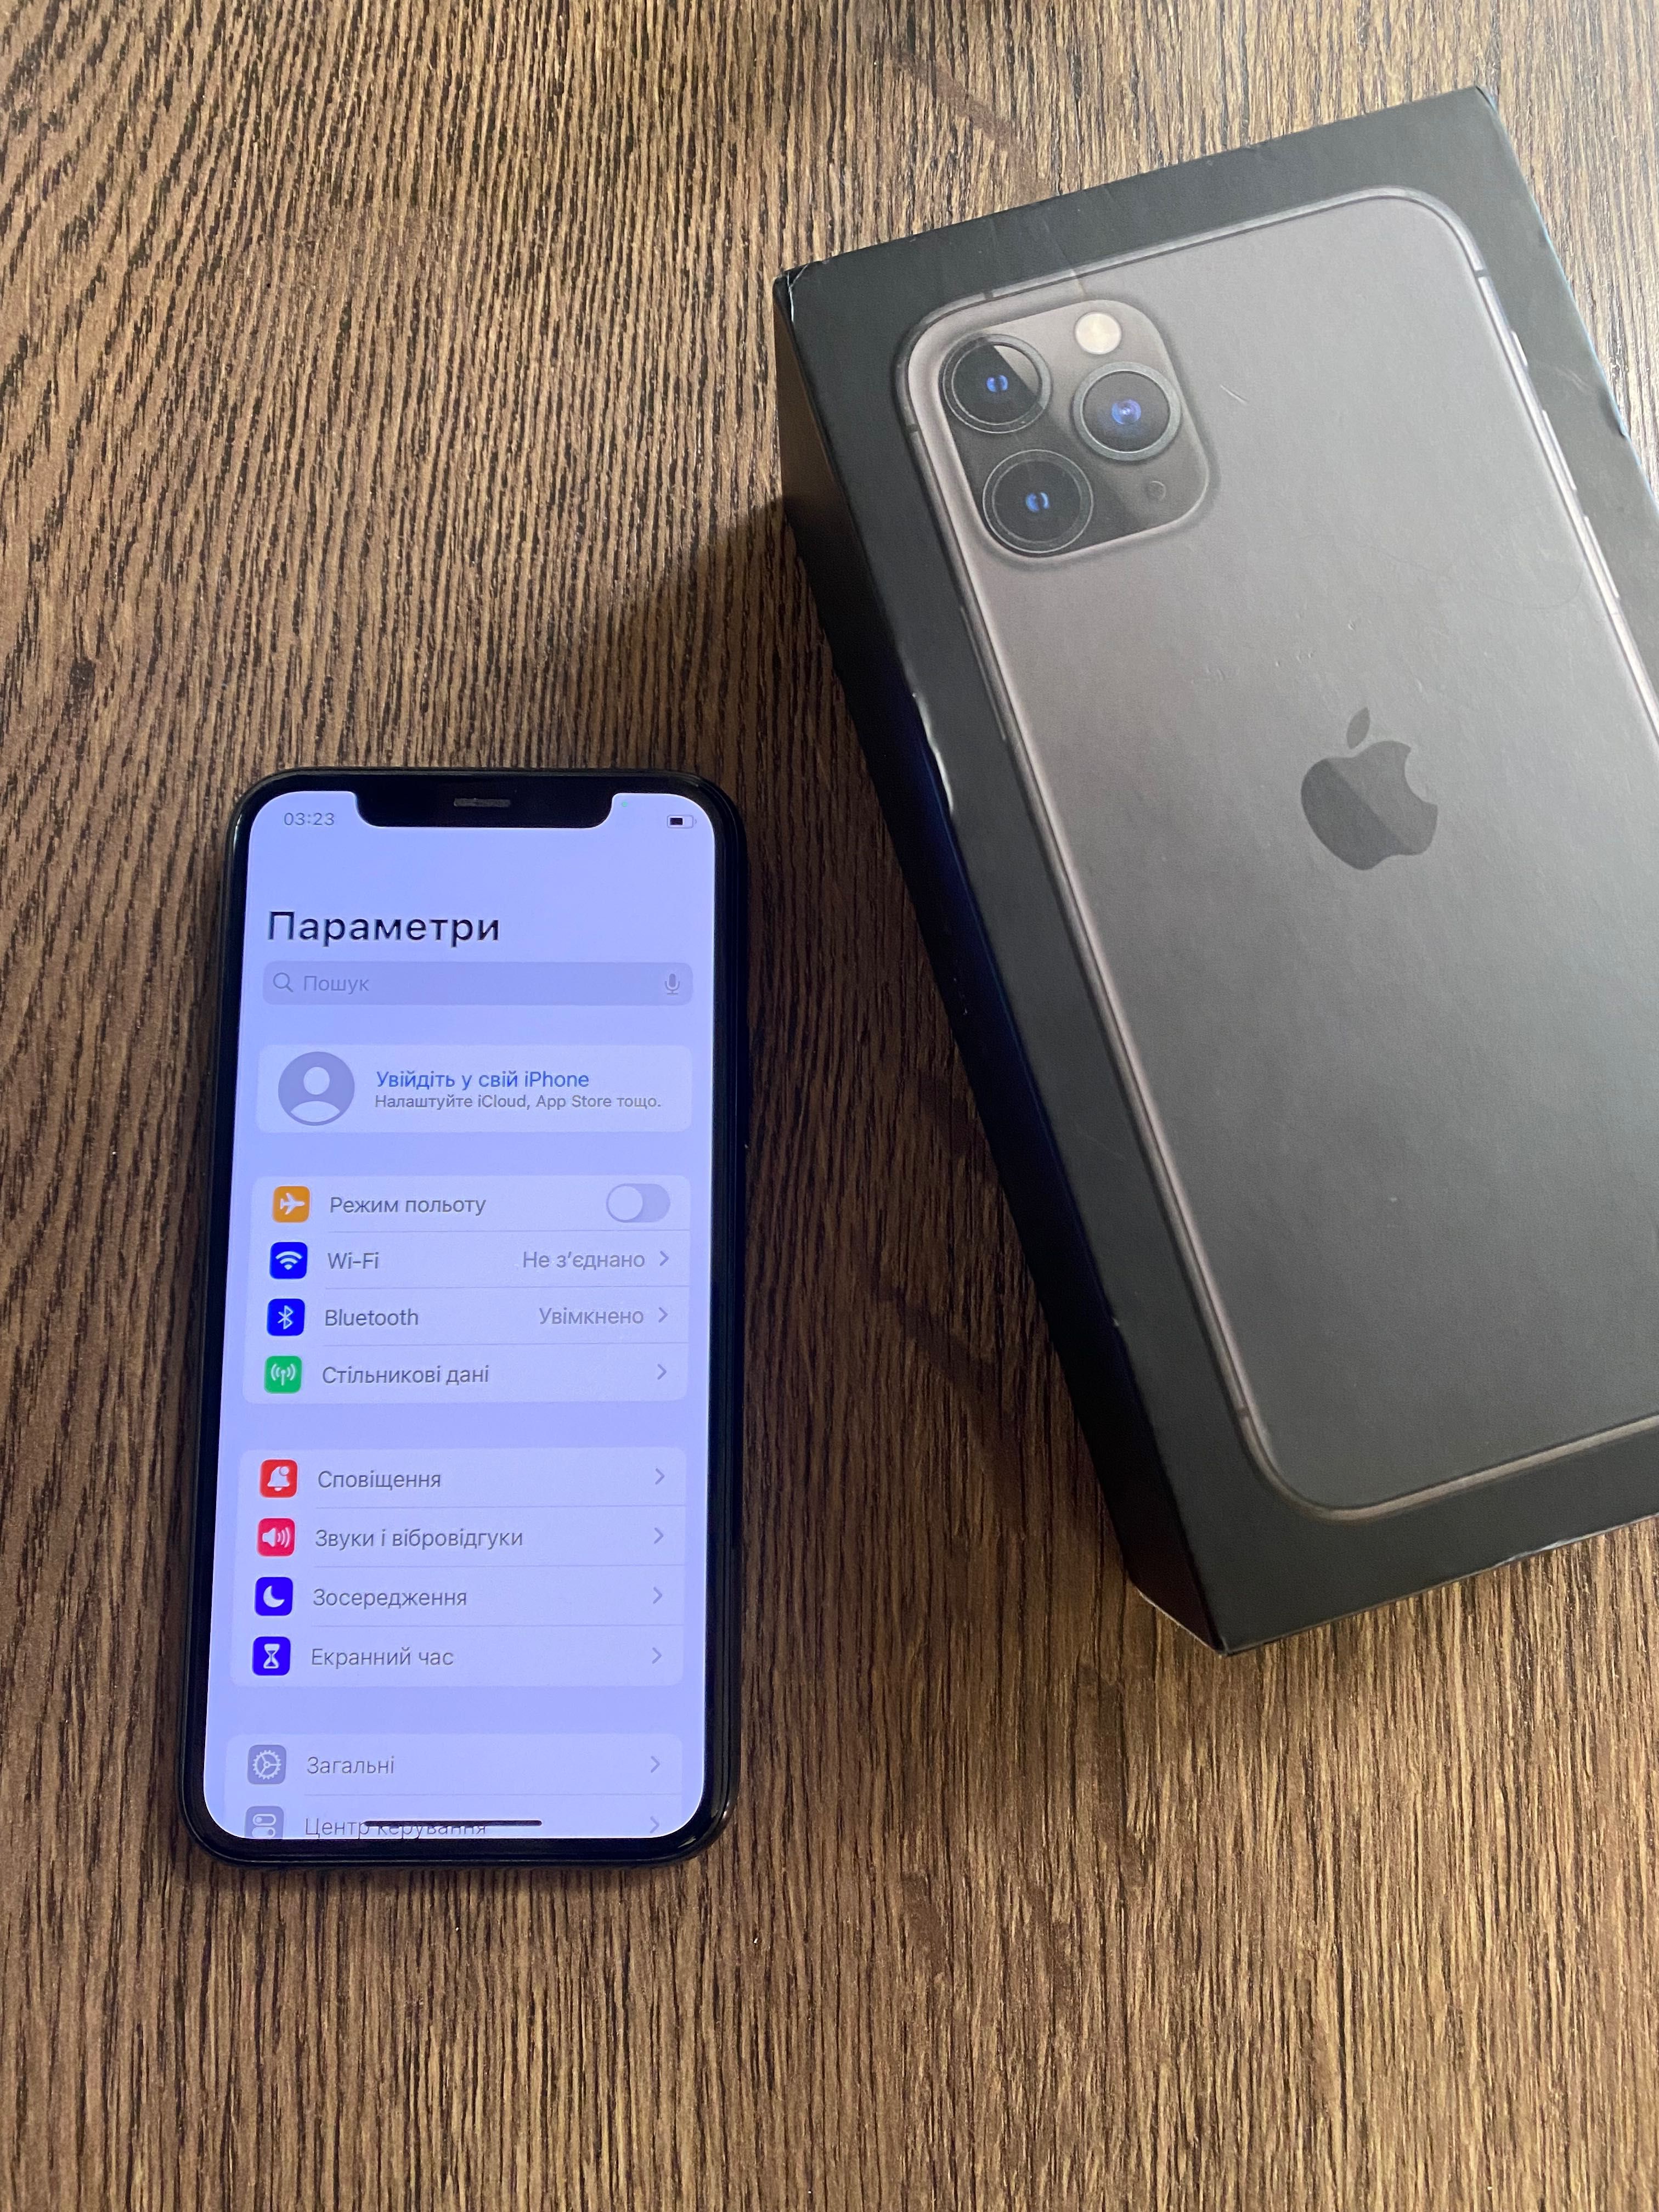 iPhone 11 Pro space gray 64gb